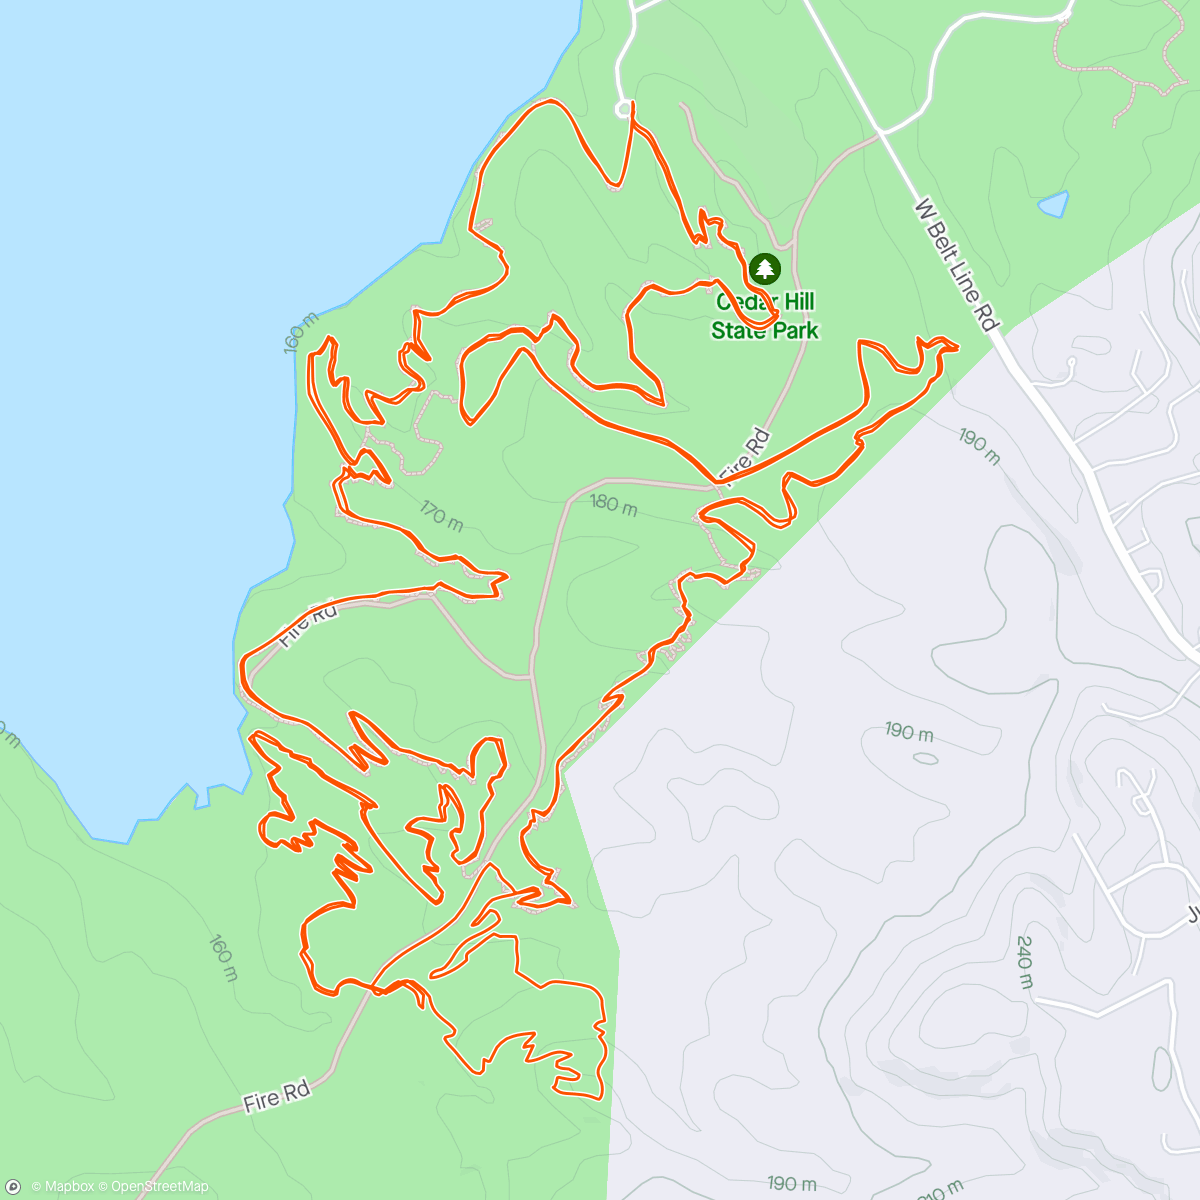 Map of the activity, Shakeout ride among the bluebonnets on the new (to me) Yeti ASR.  Forgot wheel sensor and also seat fell off once, but a great ride and got to meetup with some great riding buddies.